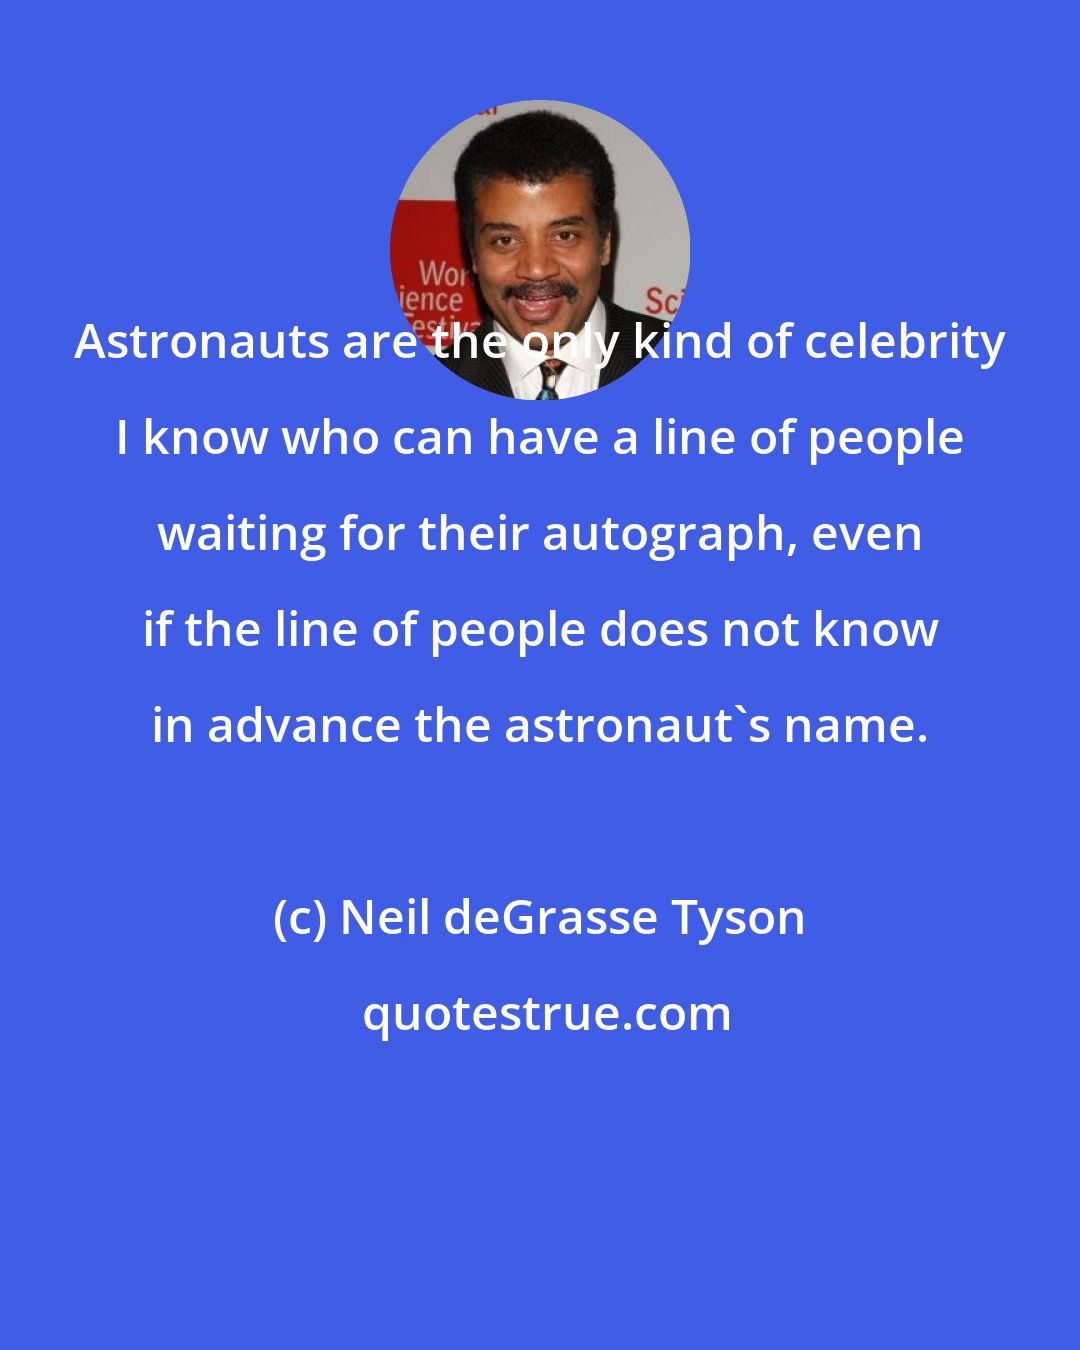 Neil deGrasse Tyson: Astronauts are the only kind of celebrity I know who can have a line of people waiting for their autograph, even if the line of people does not know in advance the astronaut's name.